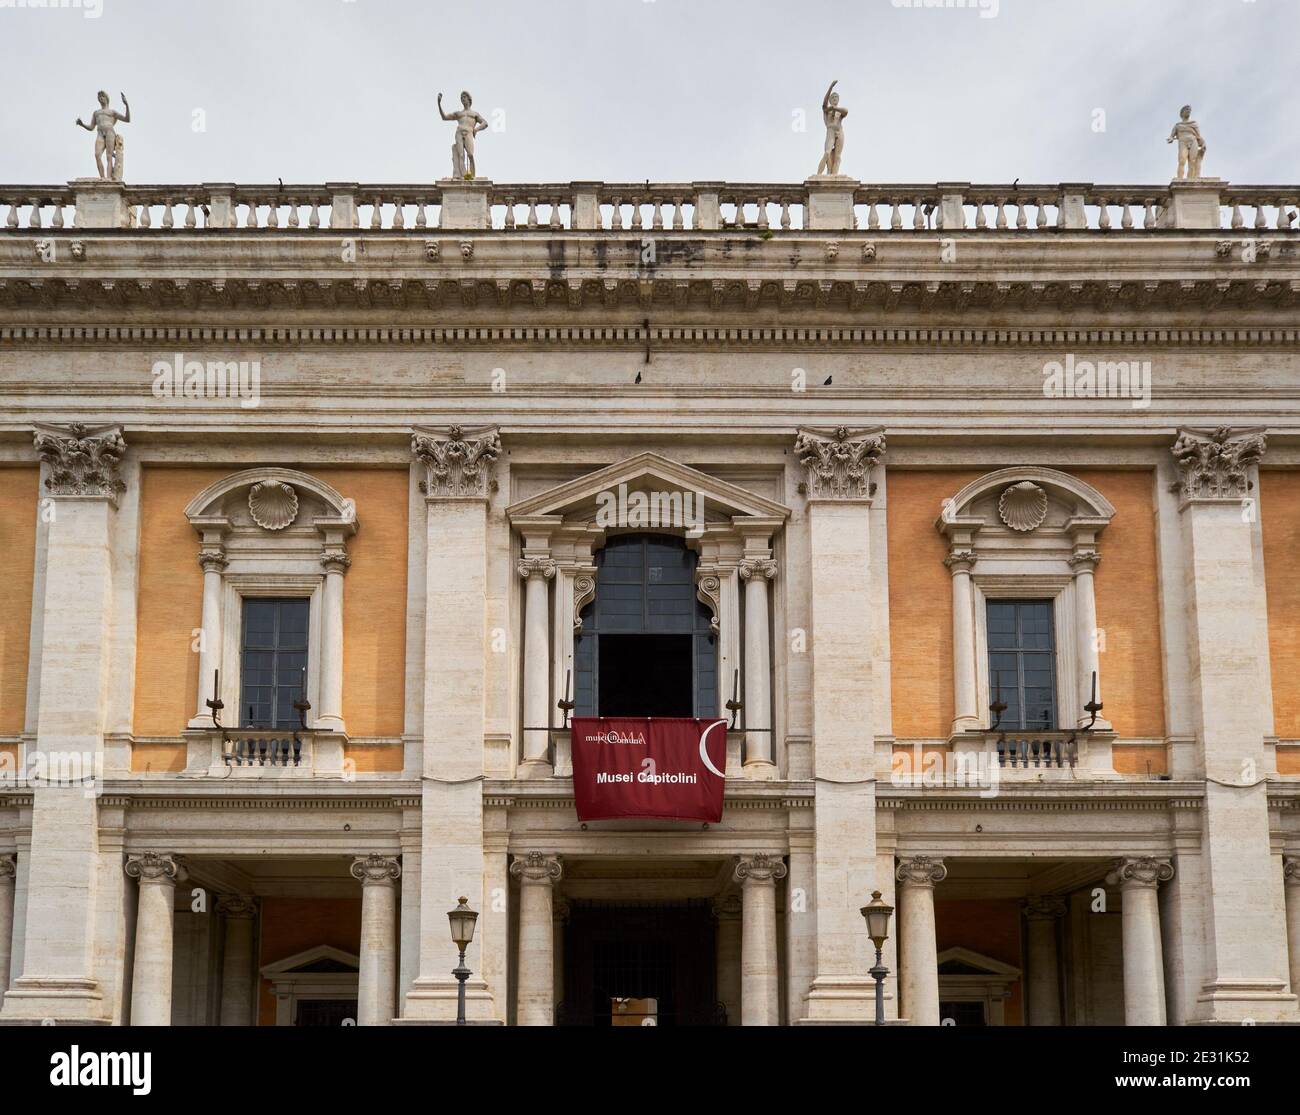 Rome, Italy - May 3, 2015: The Capitoline Museums, Musei Capitolini, in Rome, Italy Stock Photo